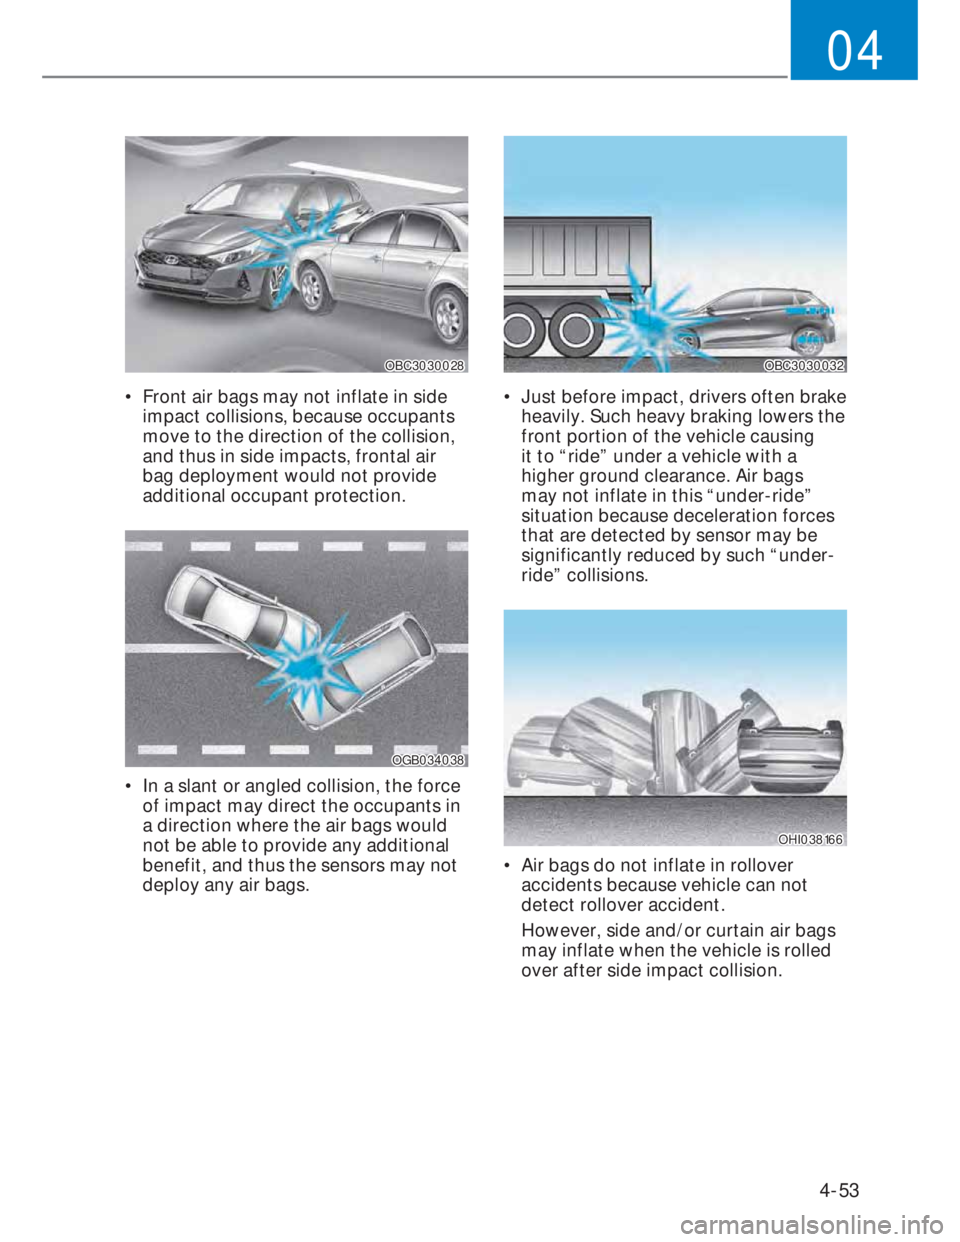 HYUNDAI I20 2021  Owners Manual 4-53
04
OBC3030028OBC3030028
•  Front air bags may not inflate in side 
impact collisions, because occupants 
move to the direction of the collision, 
and thus in side impacts, frontal air 
bag depl